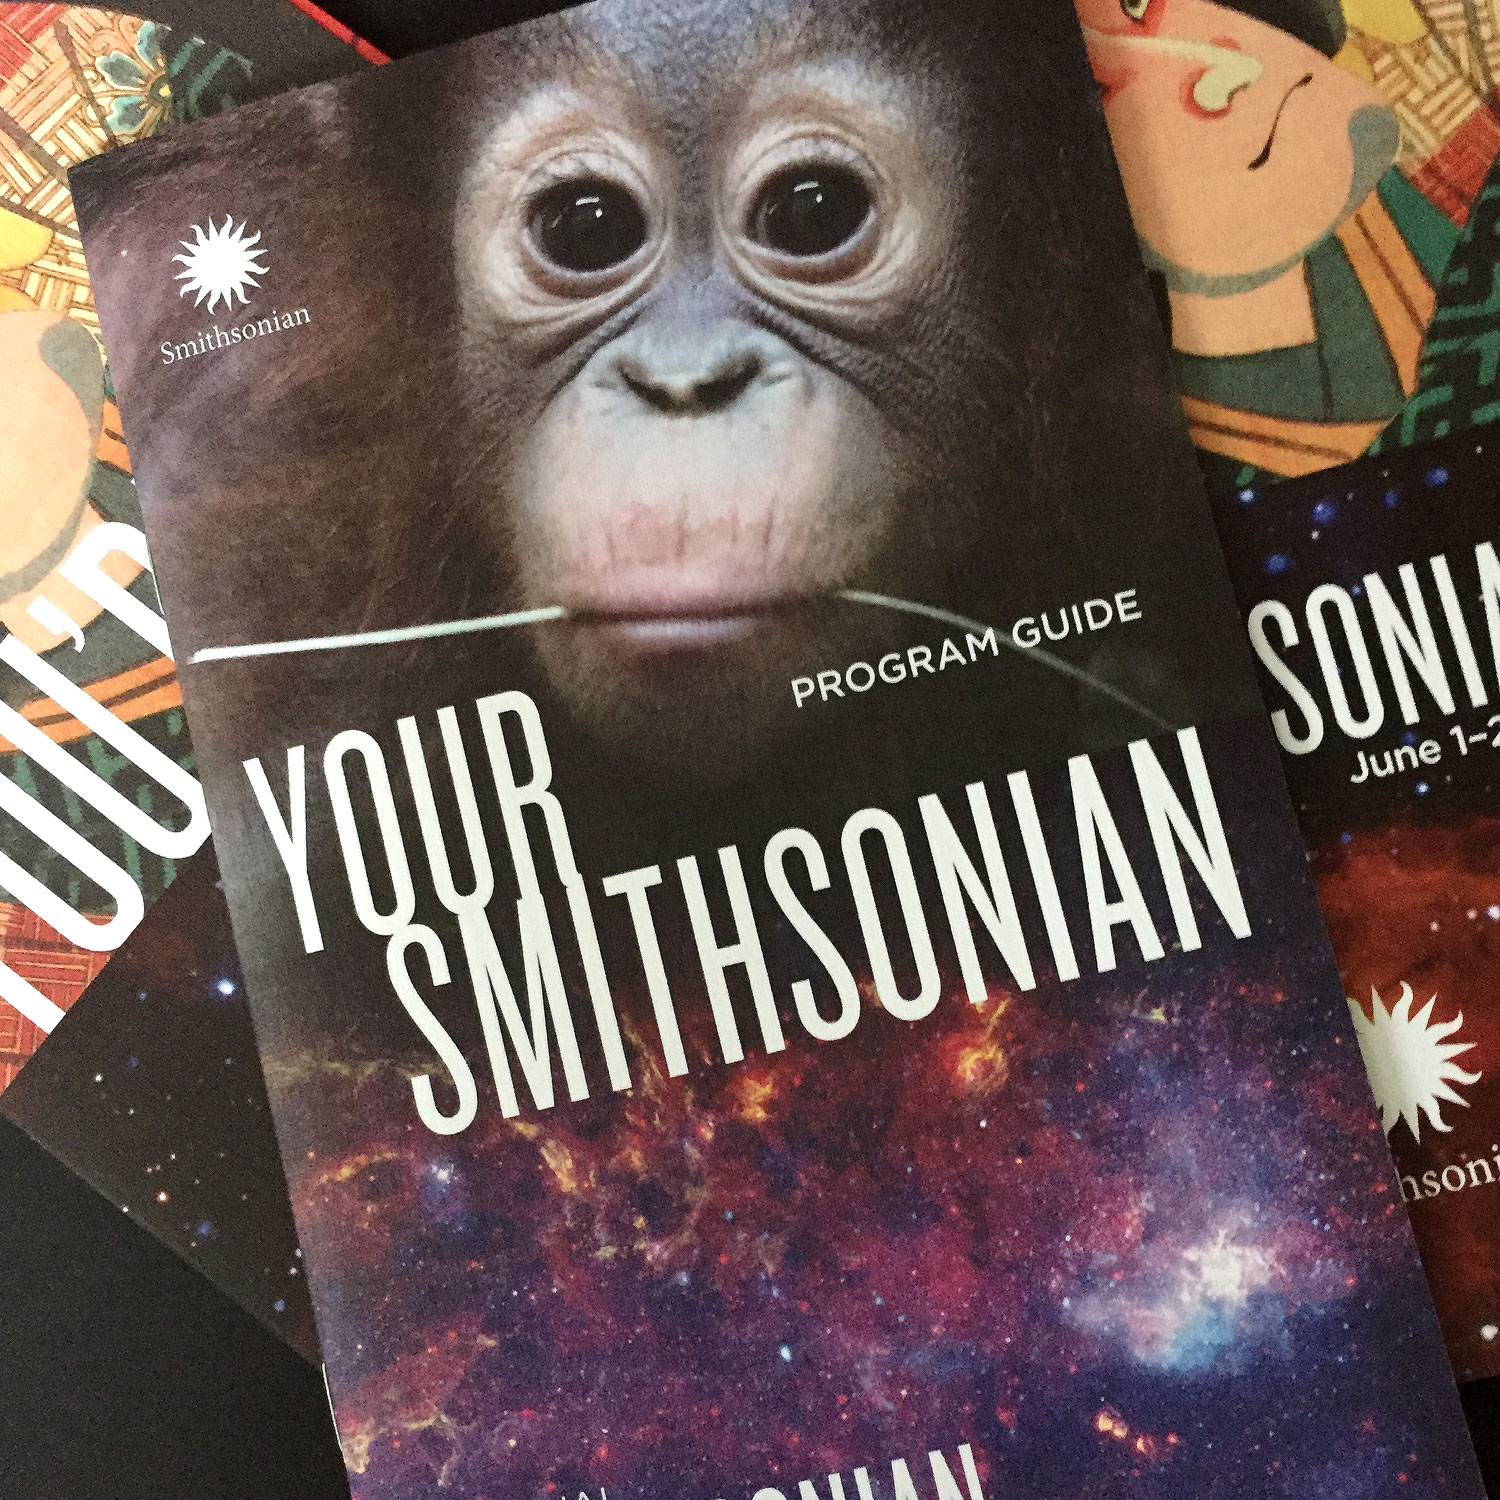   Annual Smithsonian Weekend  – Event Materials 